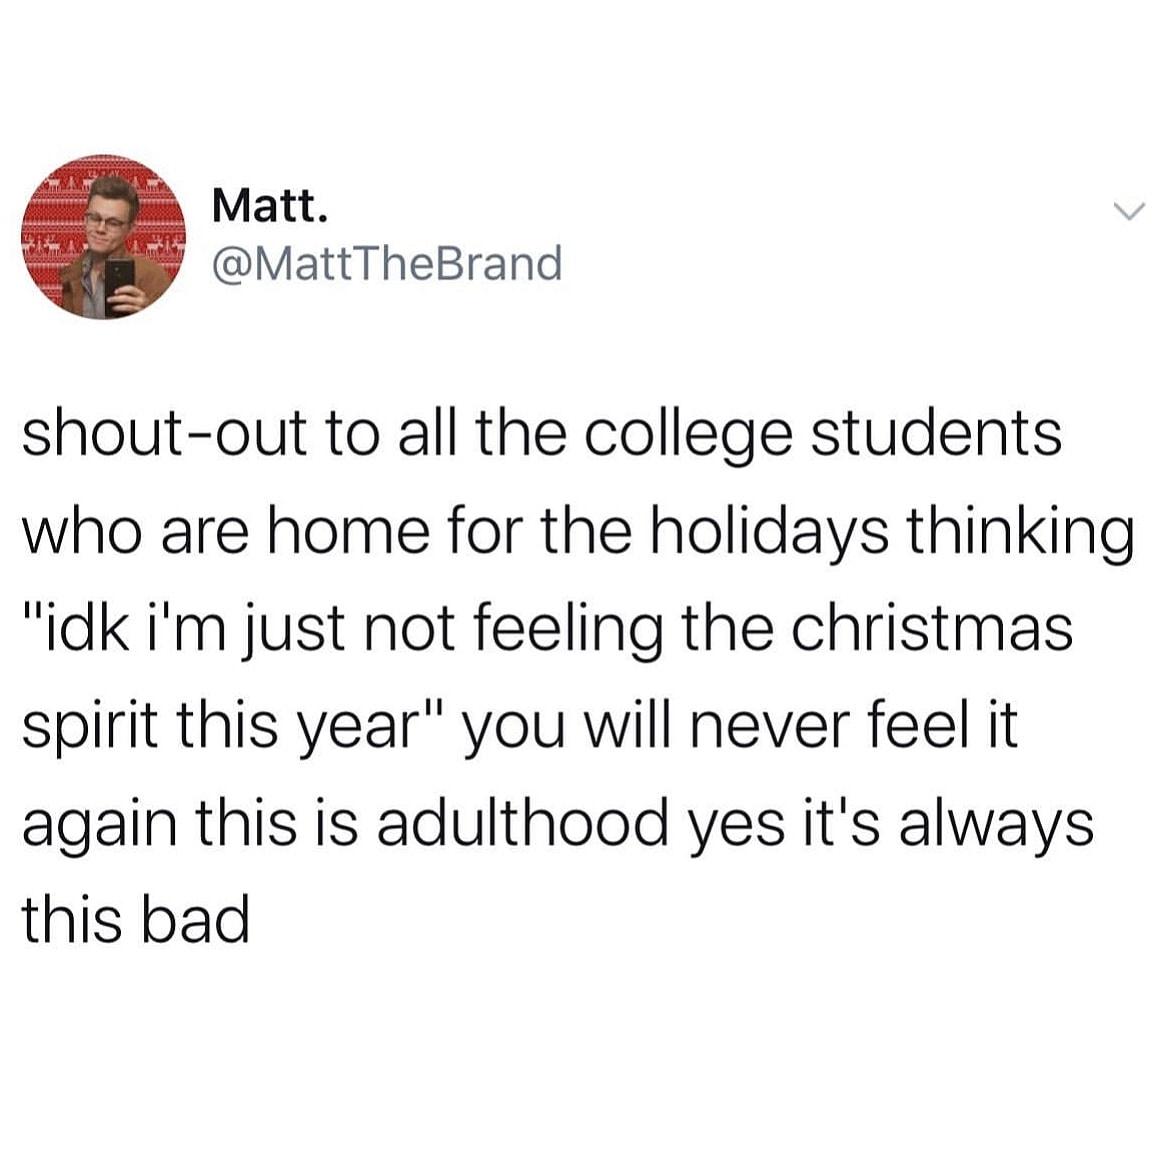 angle - Matt. shoutout to all the college students who are home for the holidays thinking "idk i'm just not feeling the christmas spirit this year" you will never feel it again this is adulthood yes it's always this bad